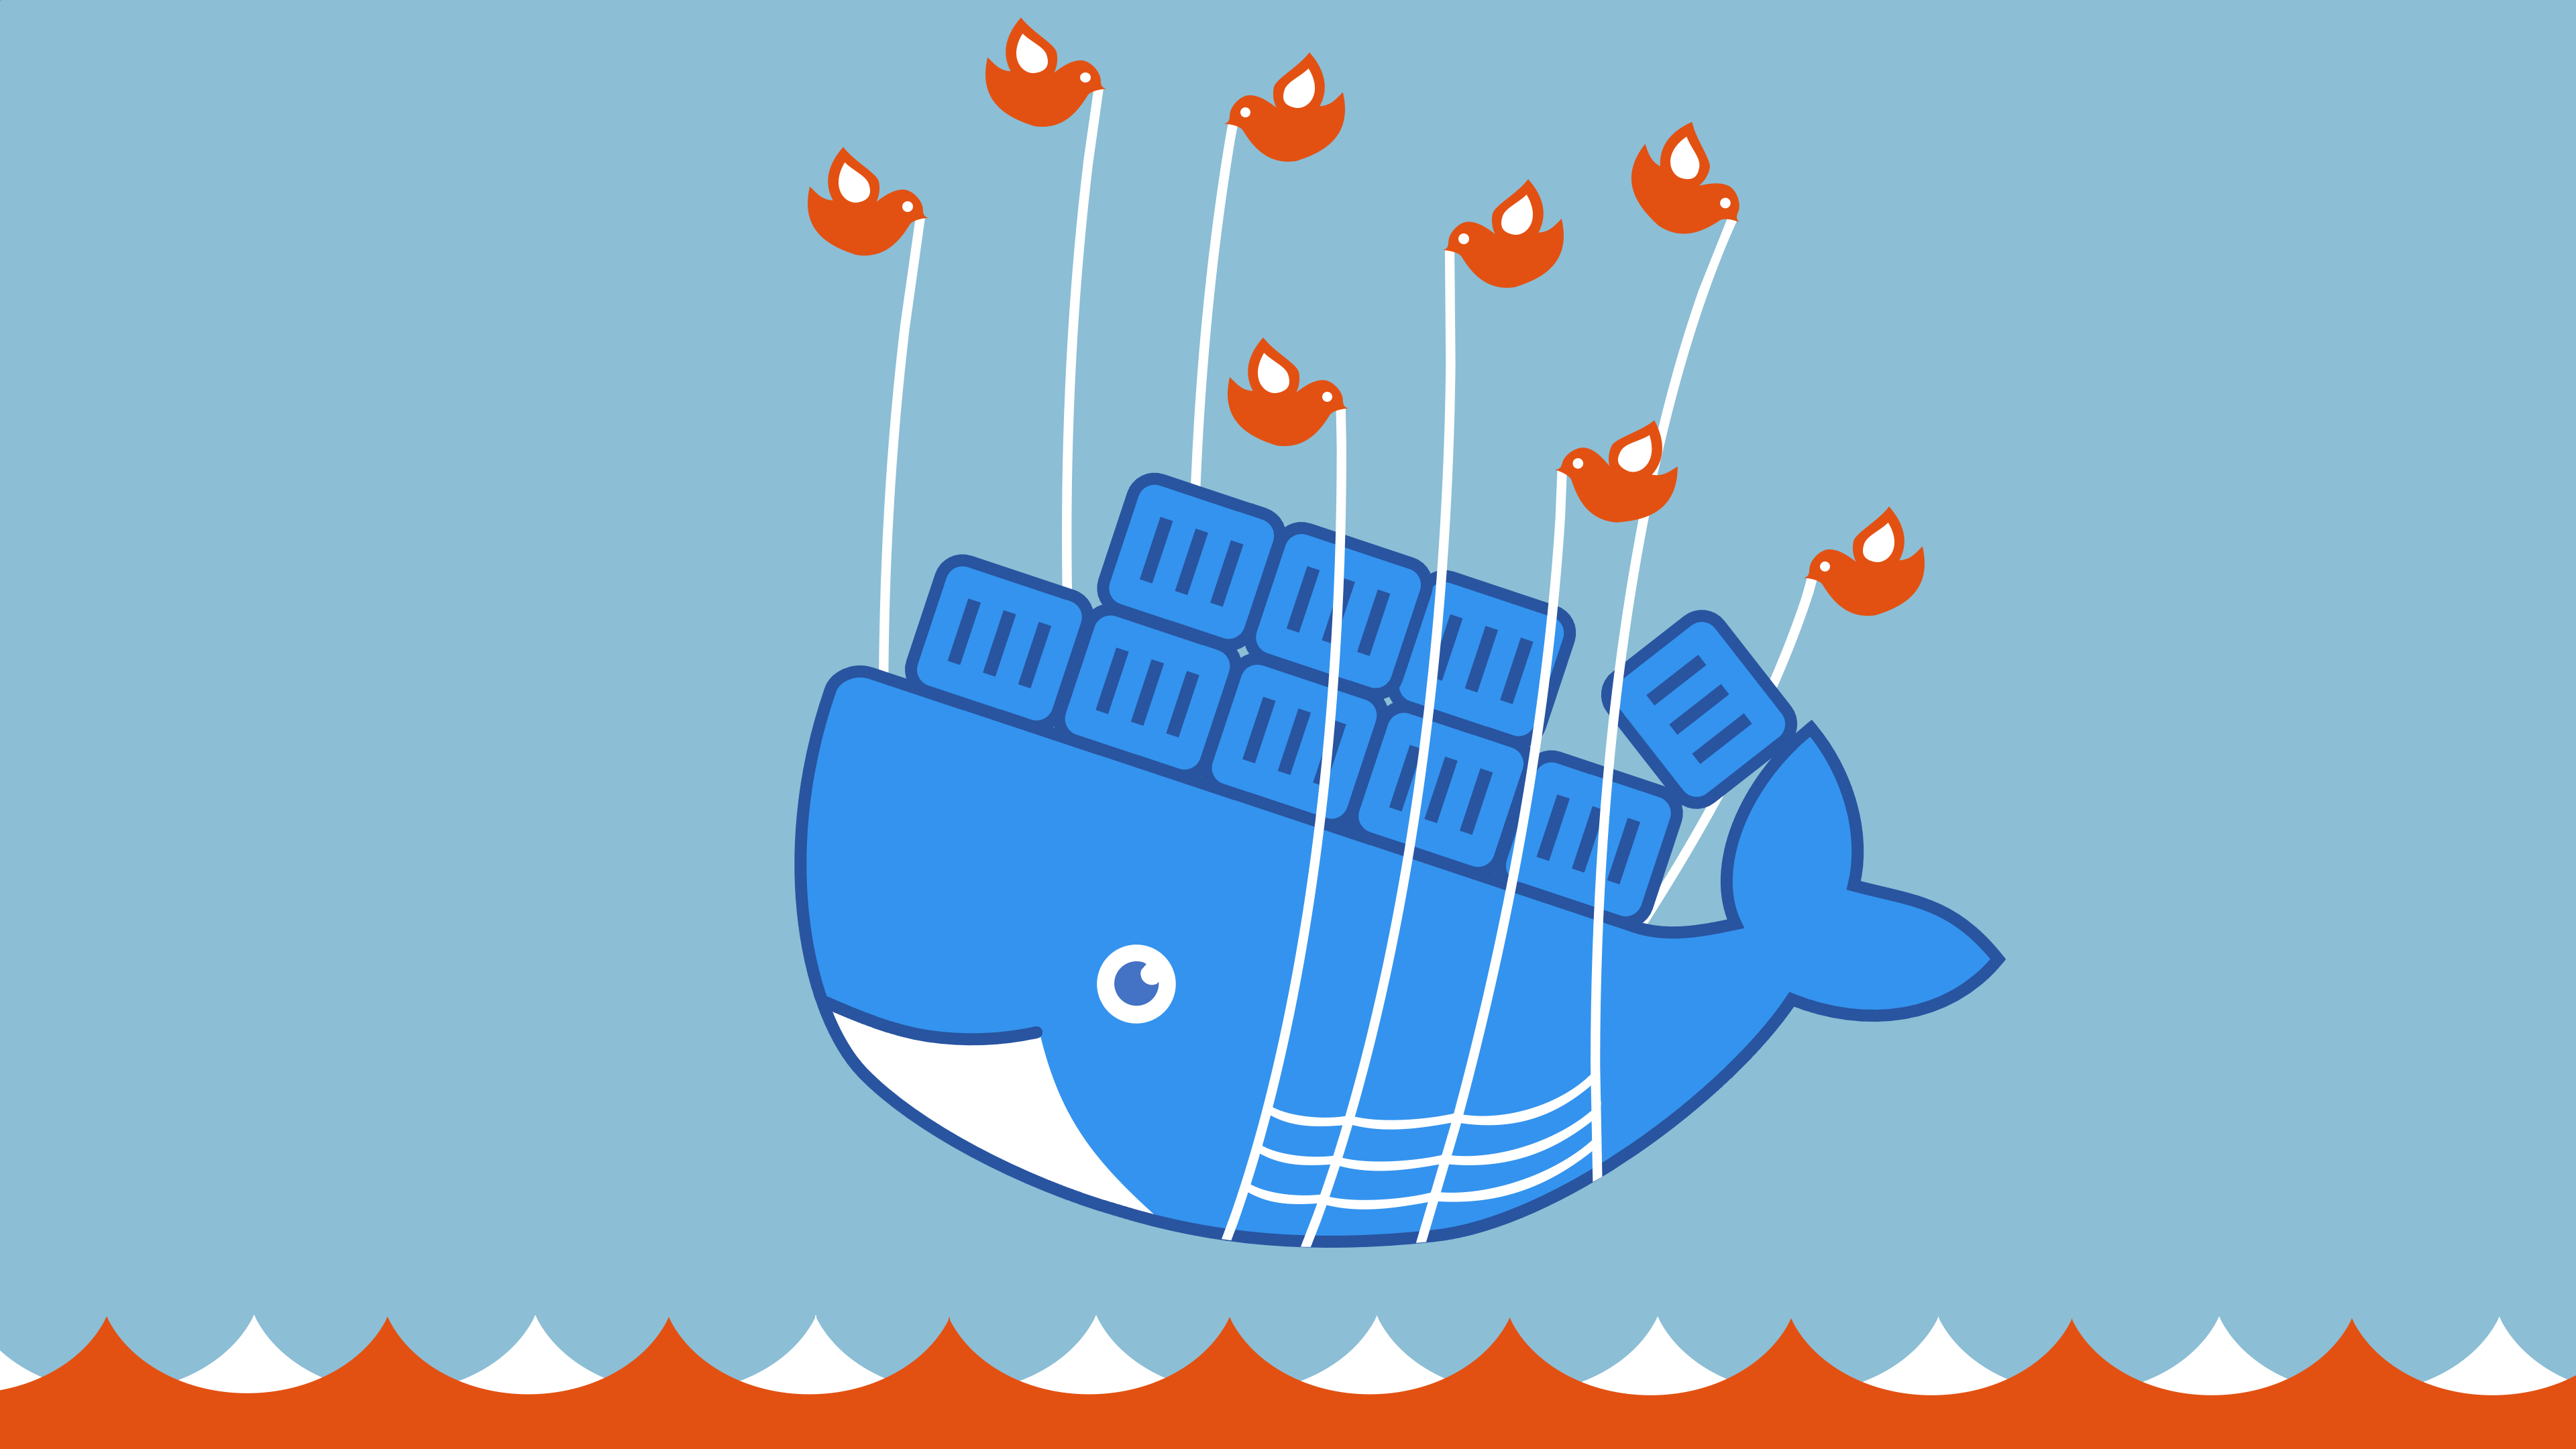 The Docker whale in Twitter’s classic fail whale image
